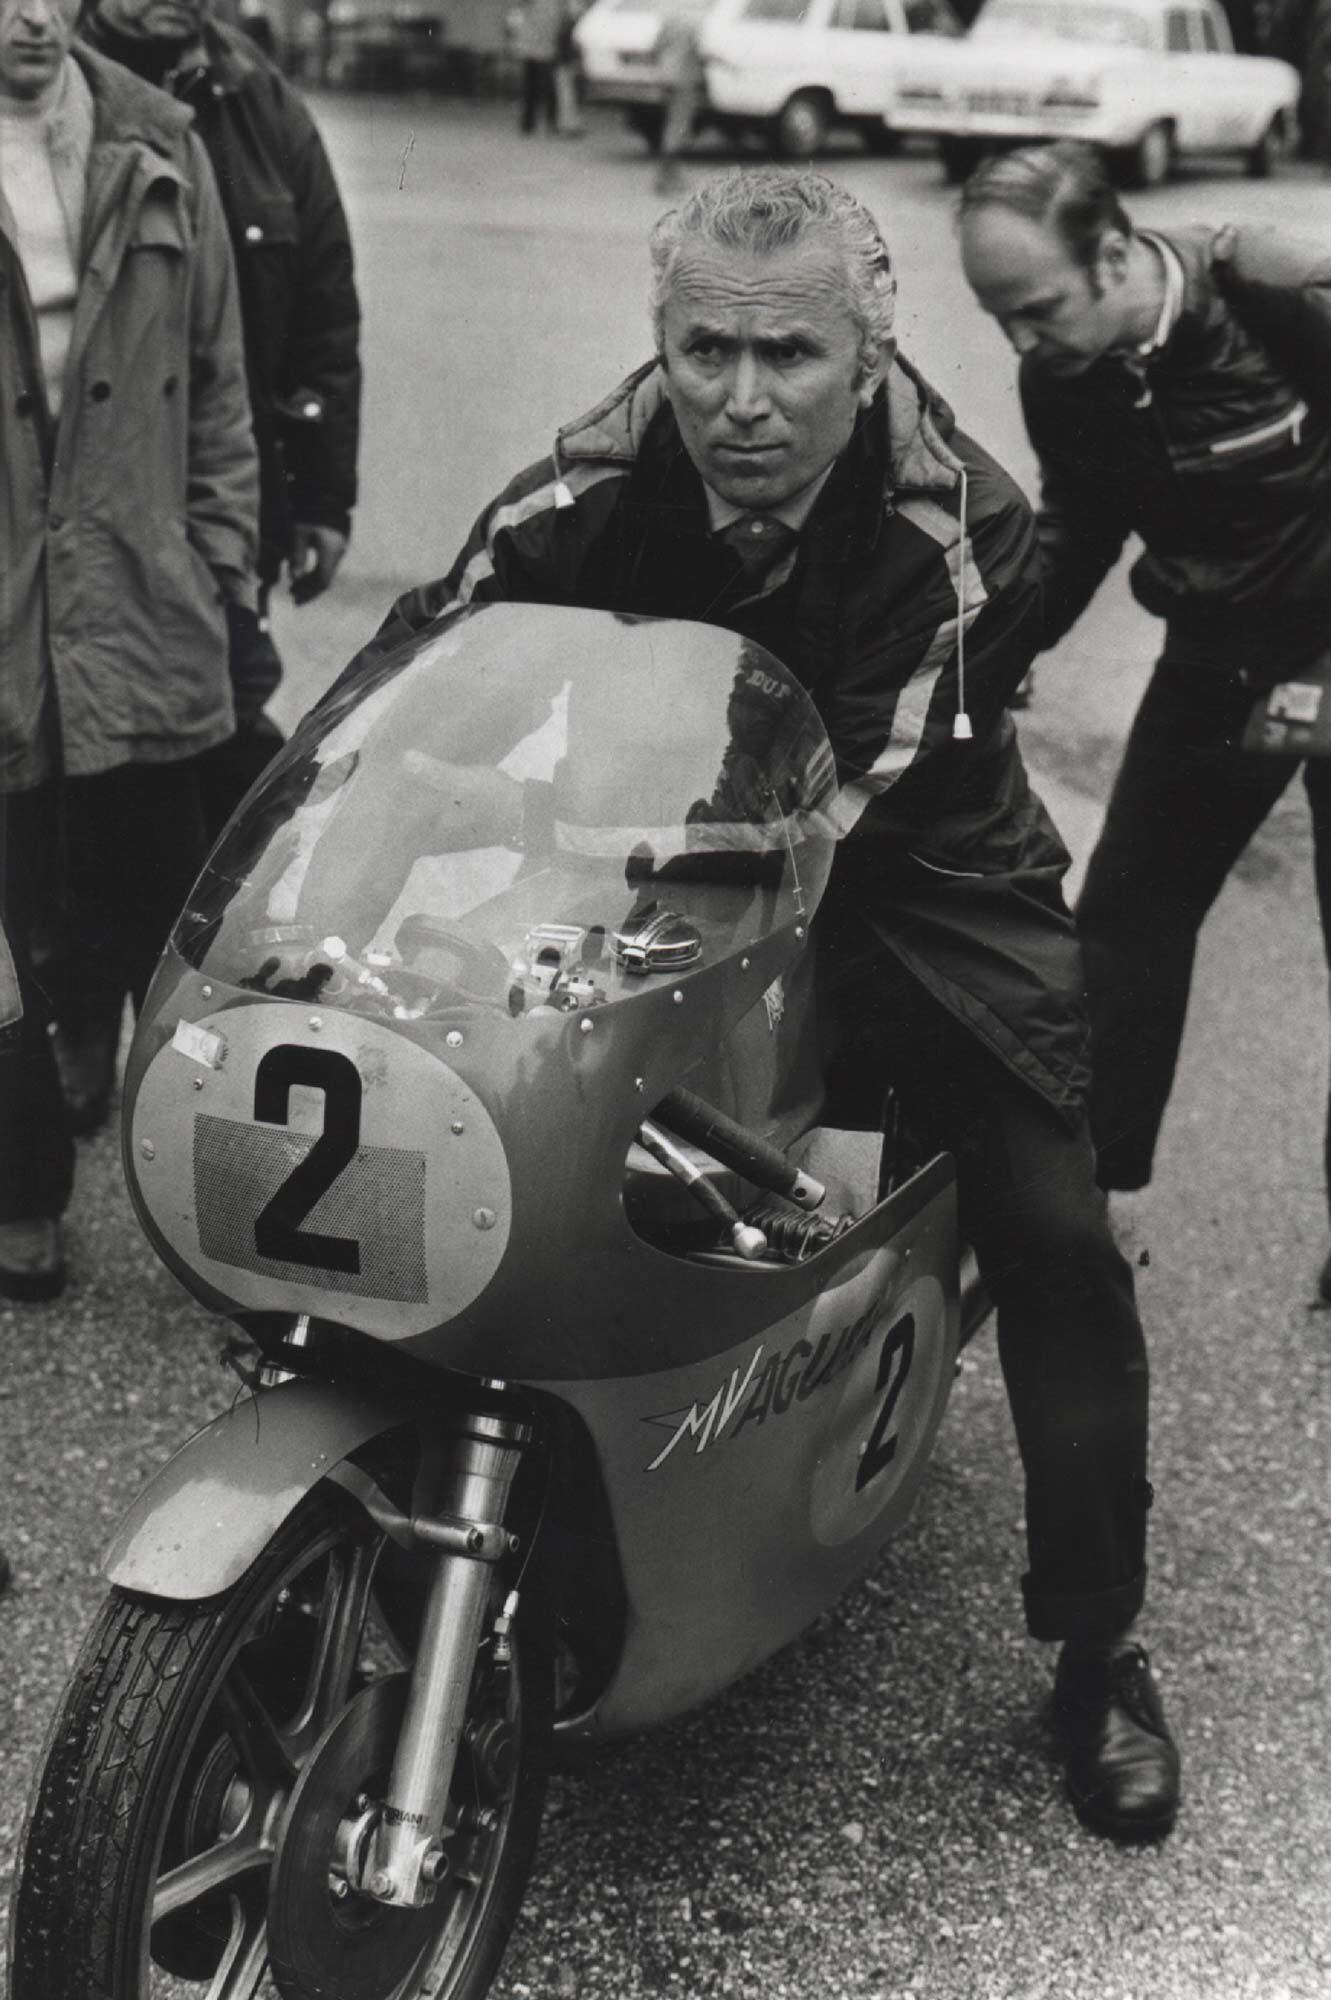 Il Maestro and one of his masterpieces: Arturo Magni aboard an MV Agusta 500 GP bike. As both technician and team manager, Magni had no peer.